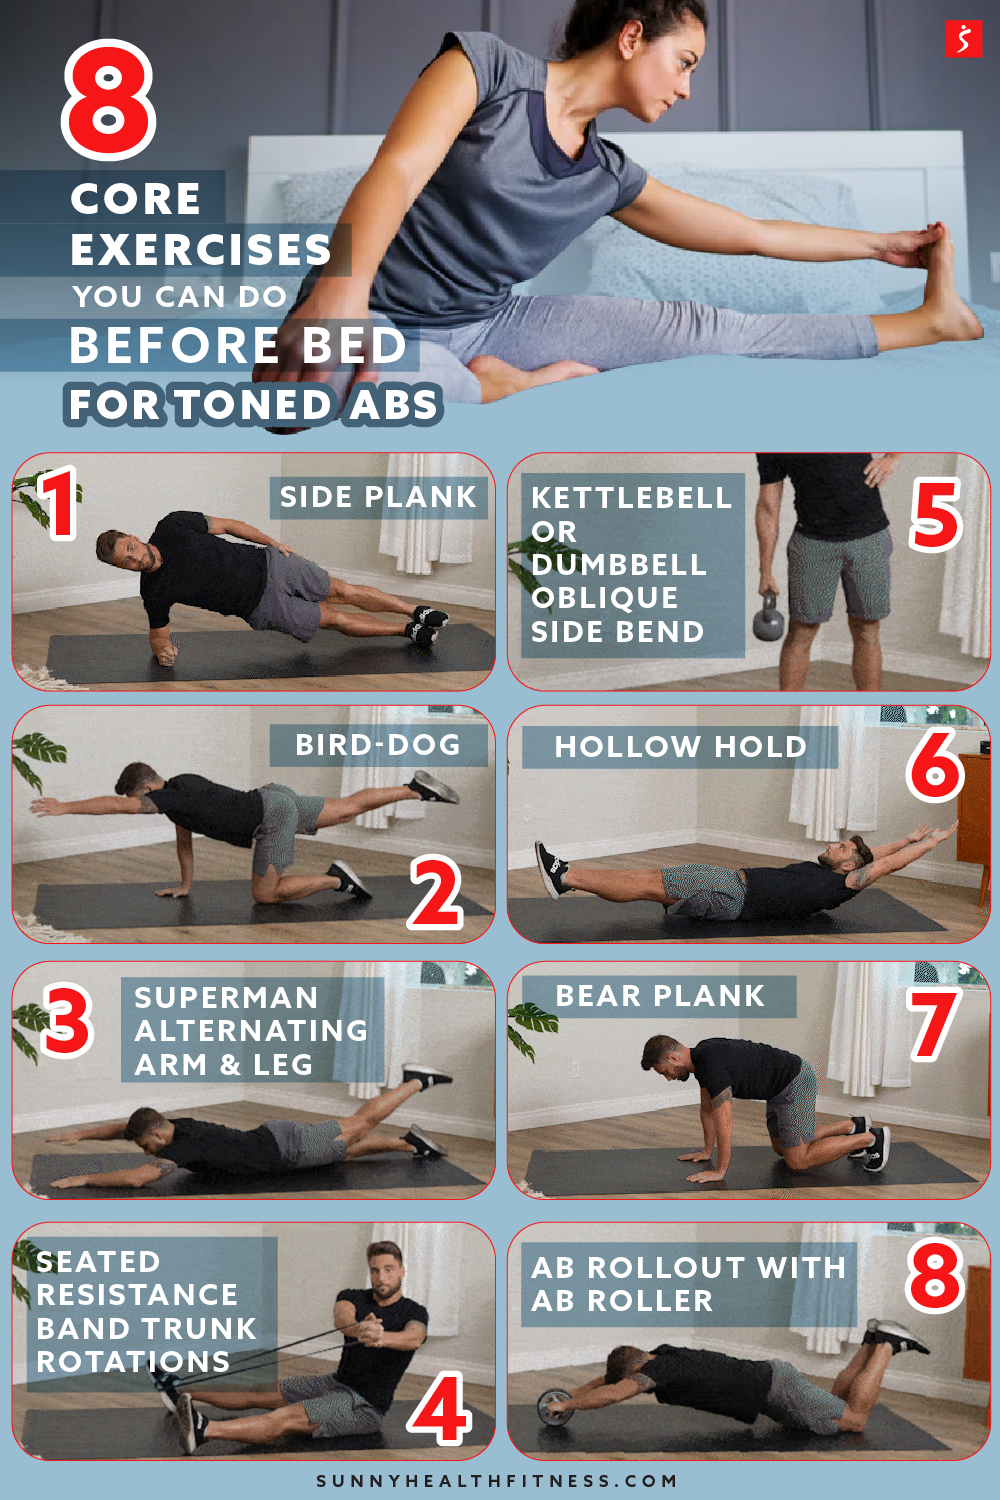 19 Bed Exercises - Workouts & Stretches to Do from Bed